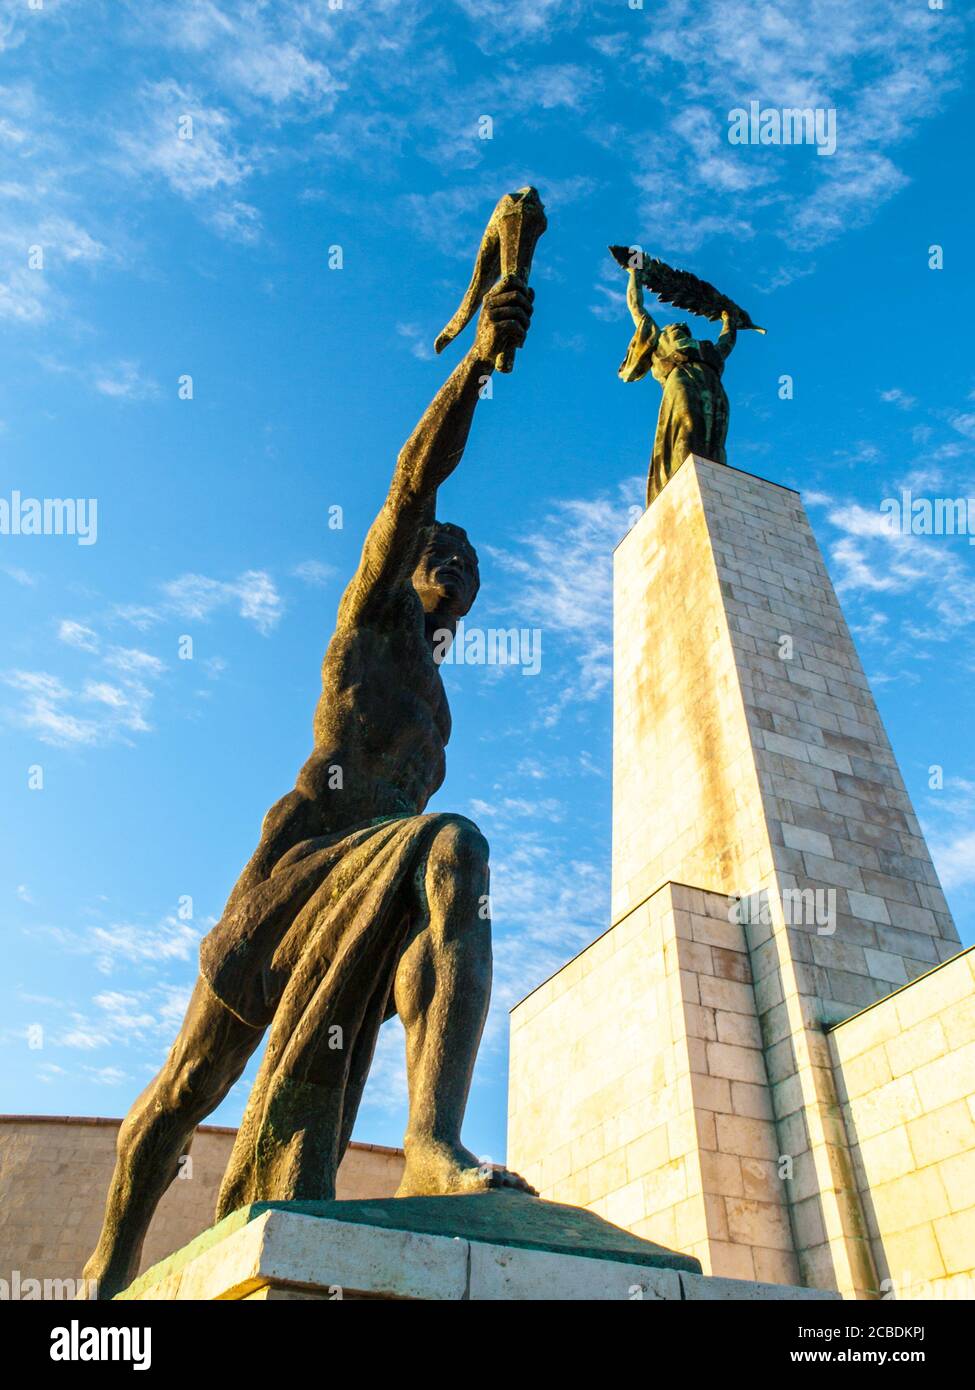 Bottom view of Liberty Statue on Gellert Hill in Budapest, Hungary, Europe. Stock Photo